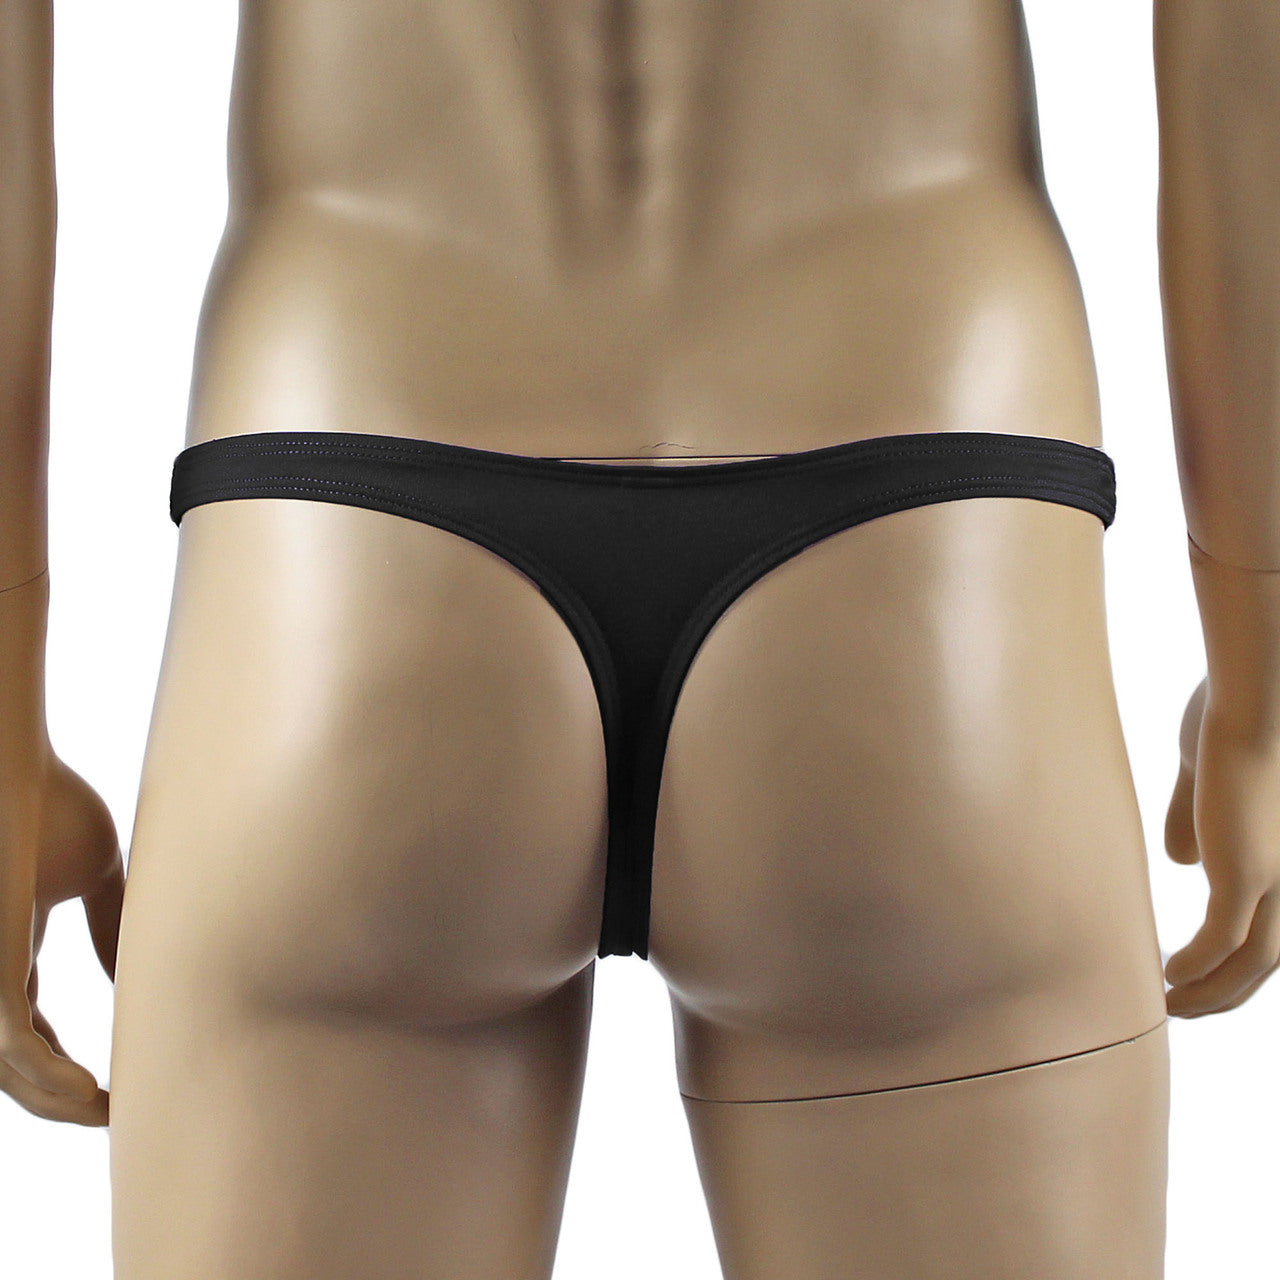 Male Angel Lingerie Stretch Spandex Thong with Bow Black